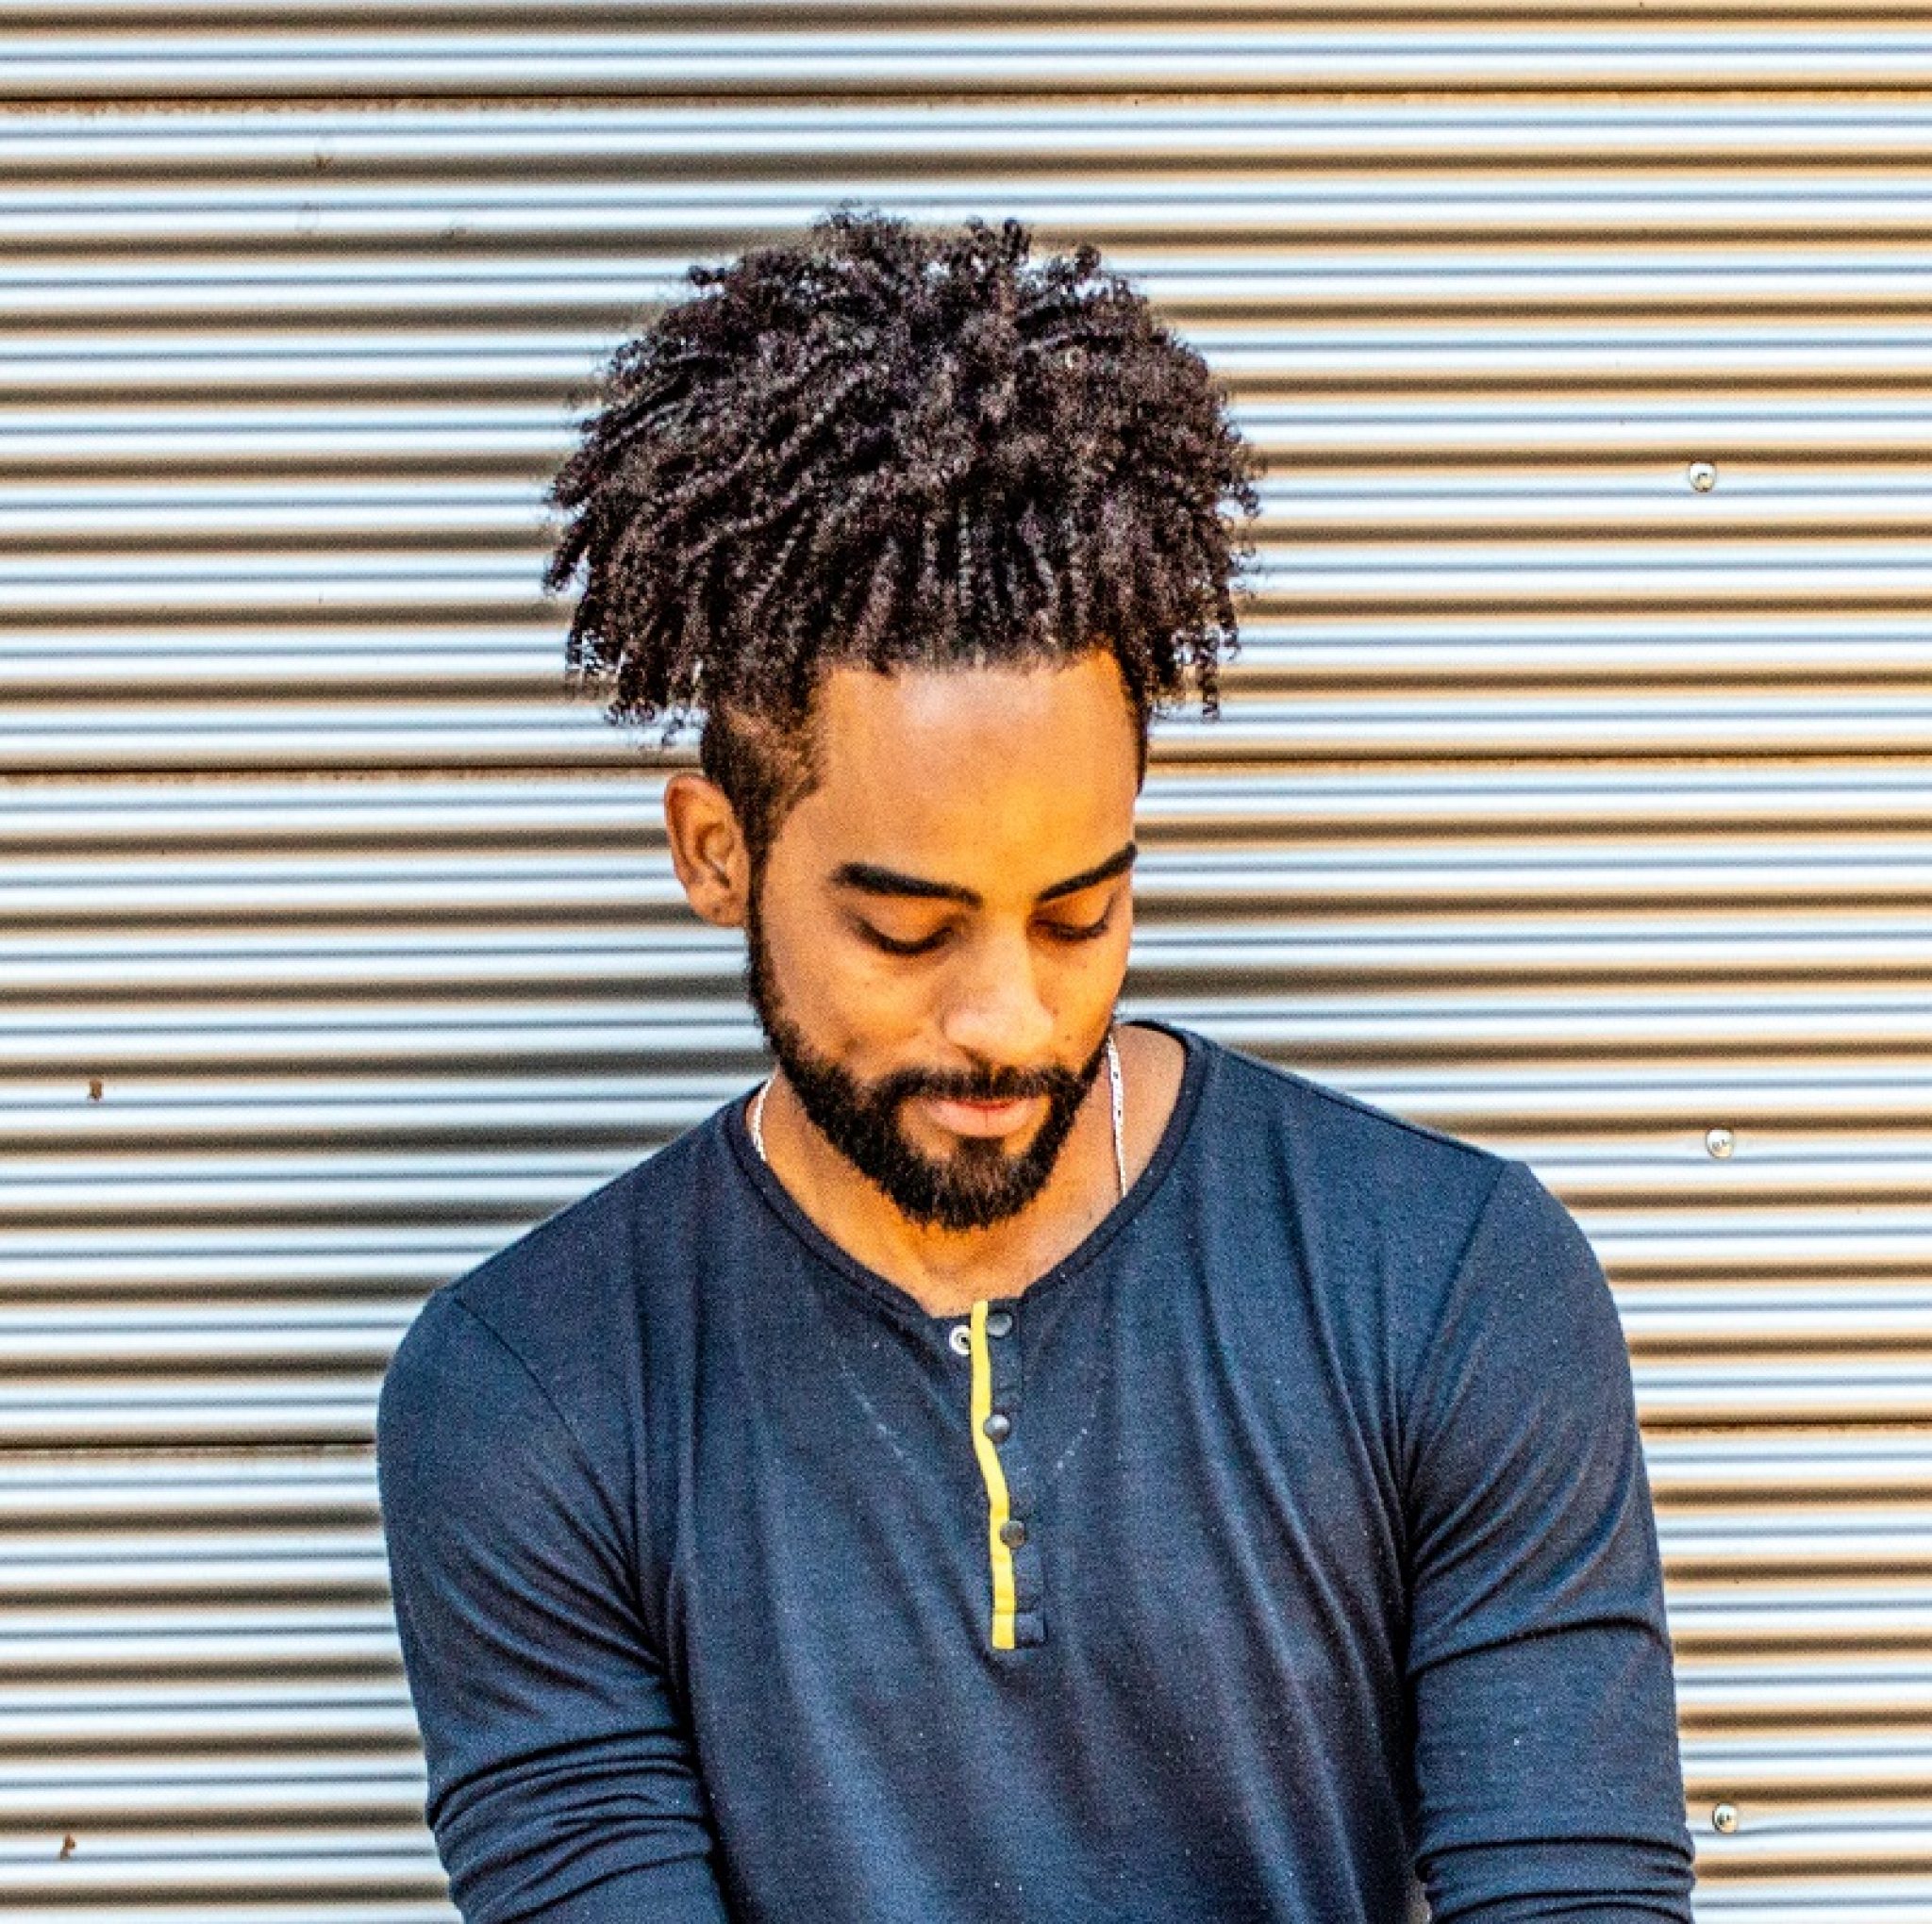 Of The Coolest Curly Hairstyles For Black Men Machohairstyles